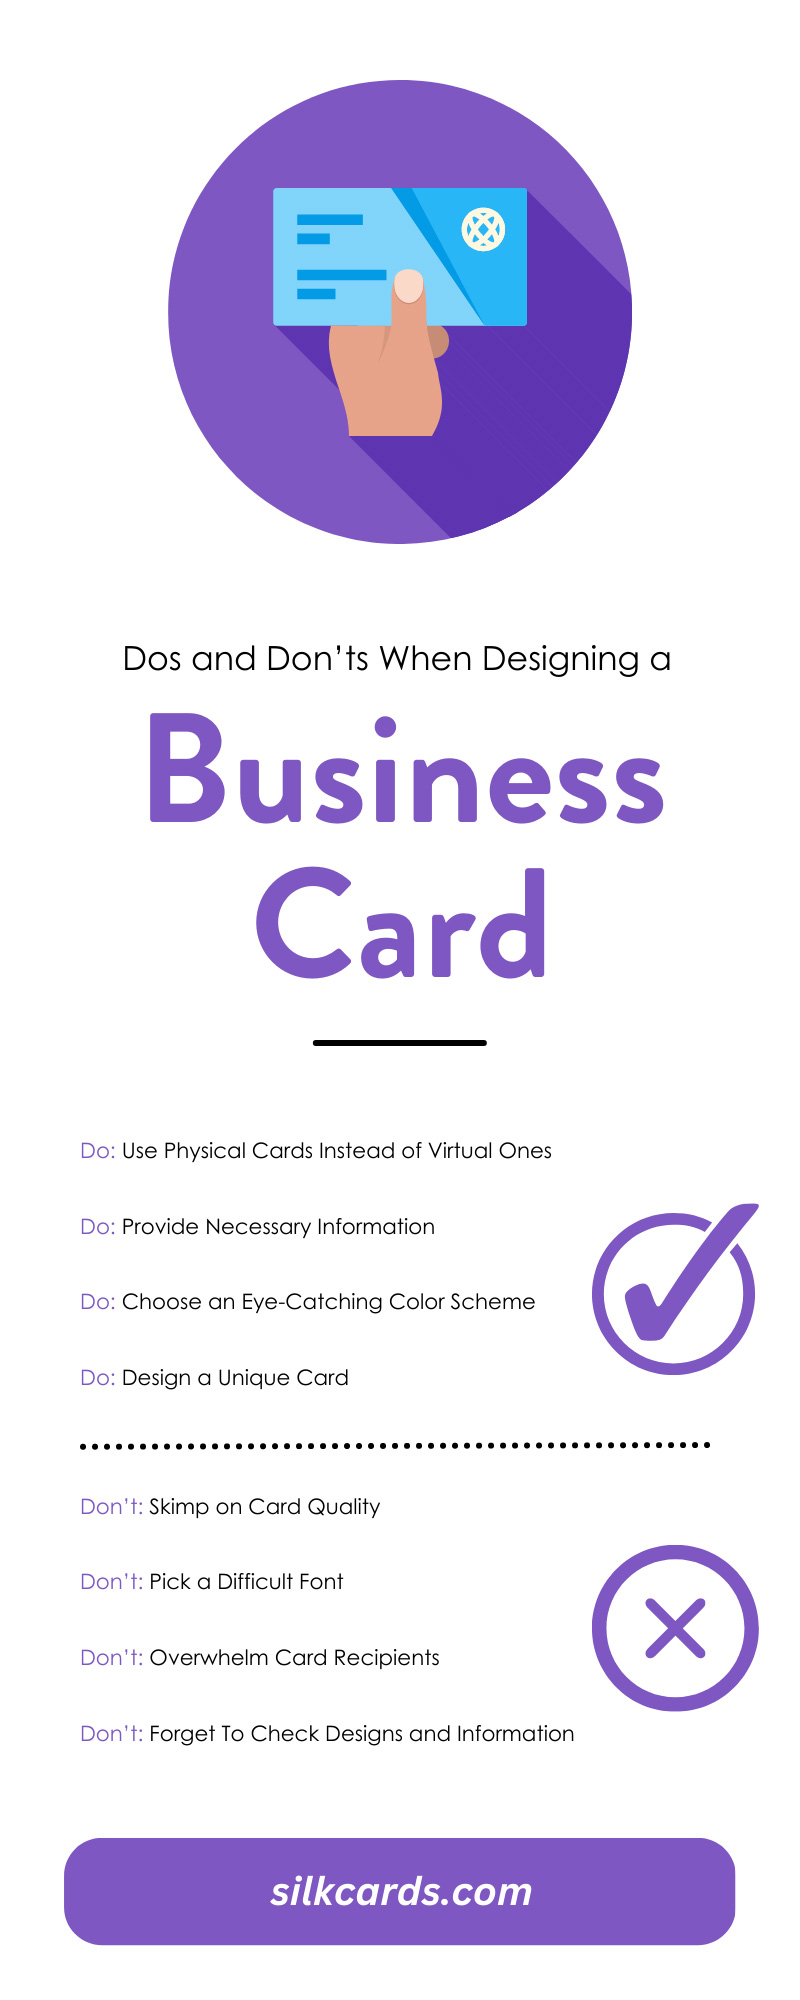 Dos and Don’ts When Designing a Business Card